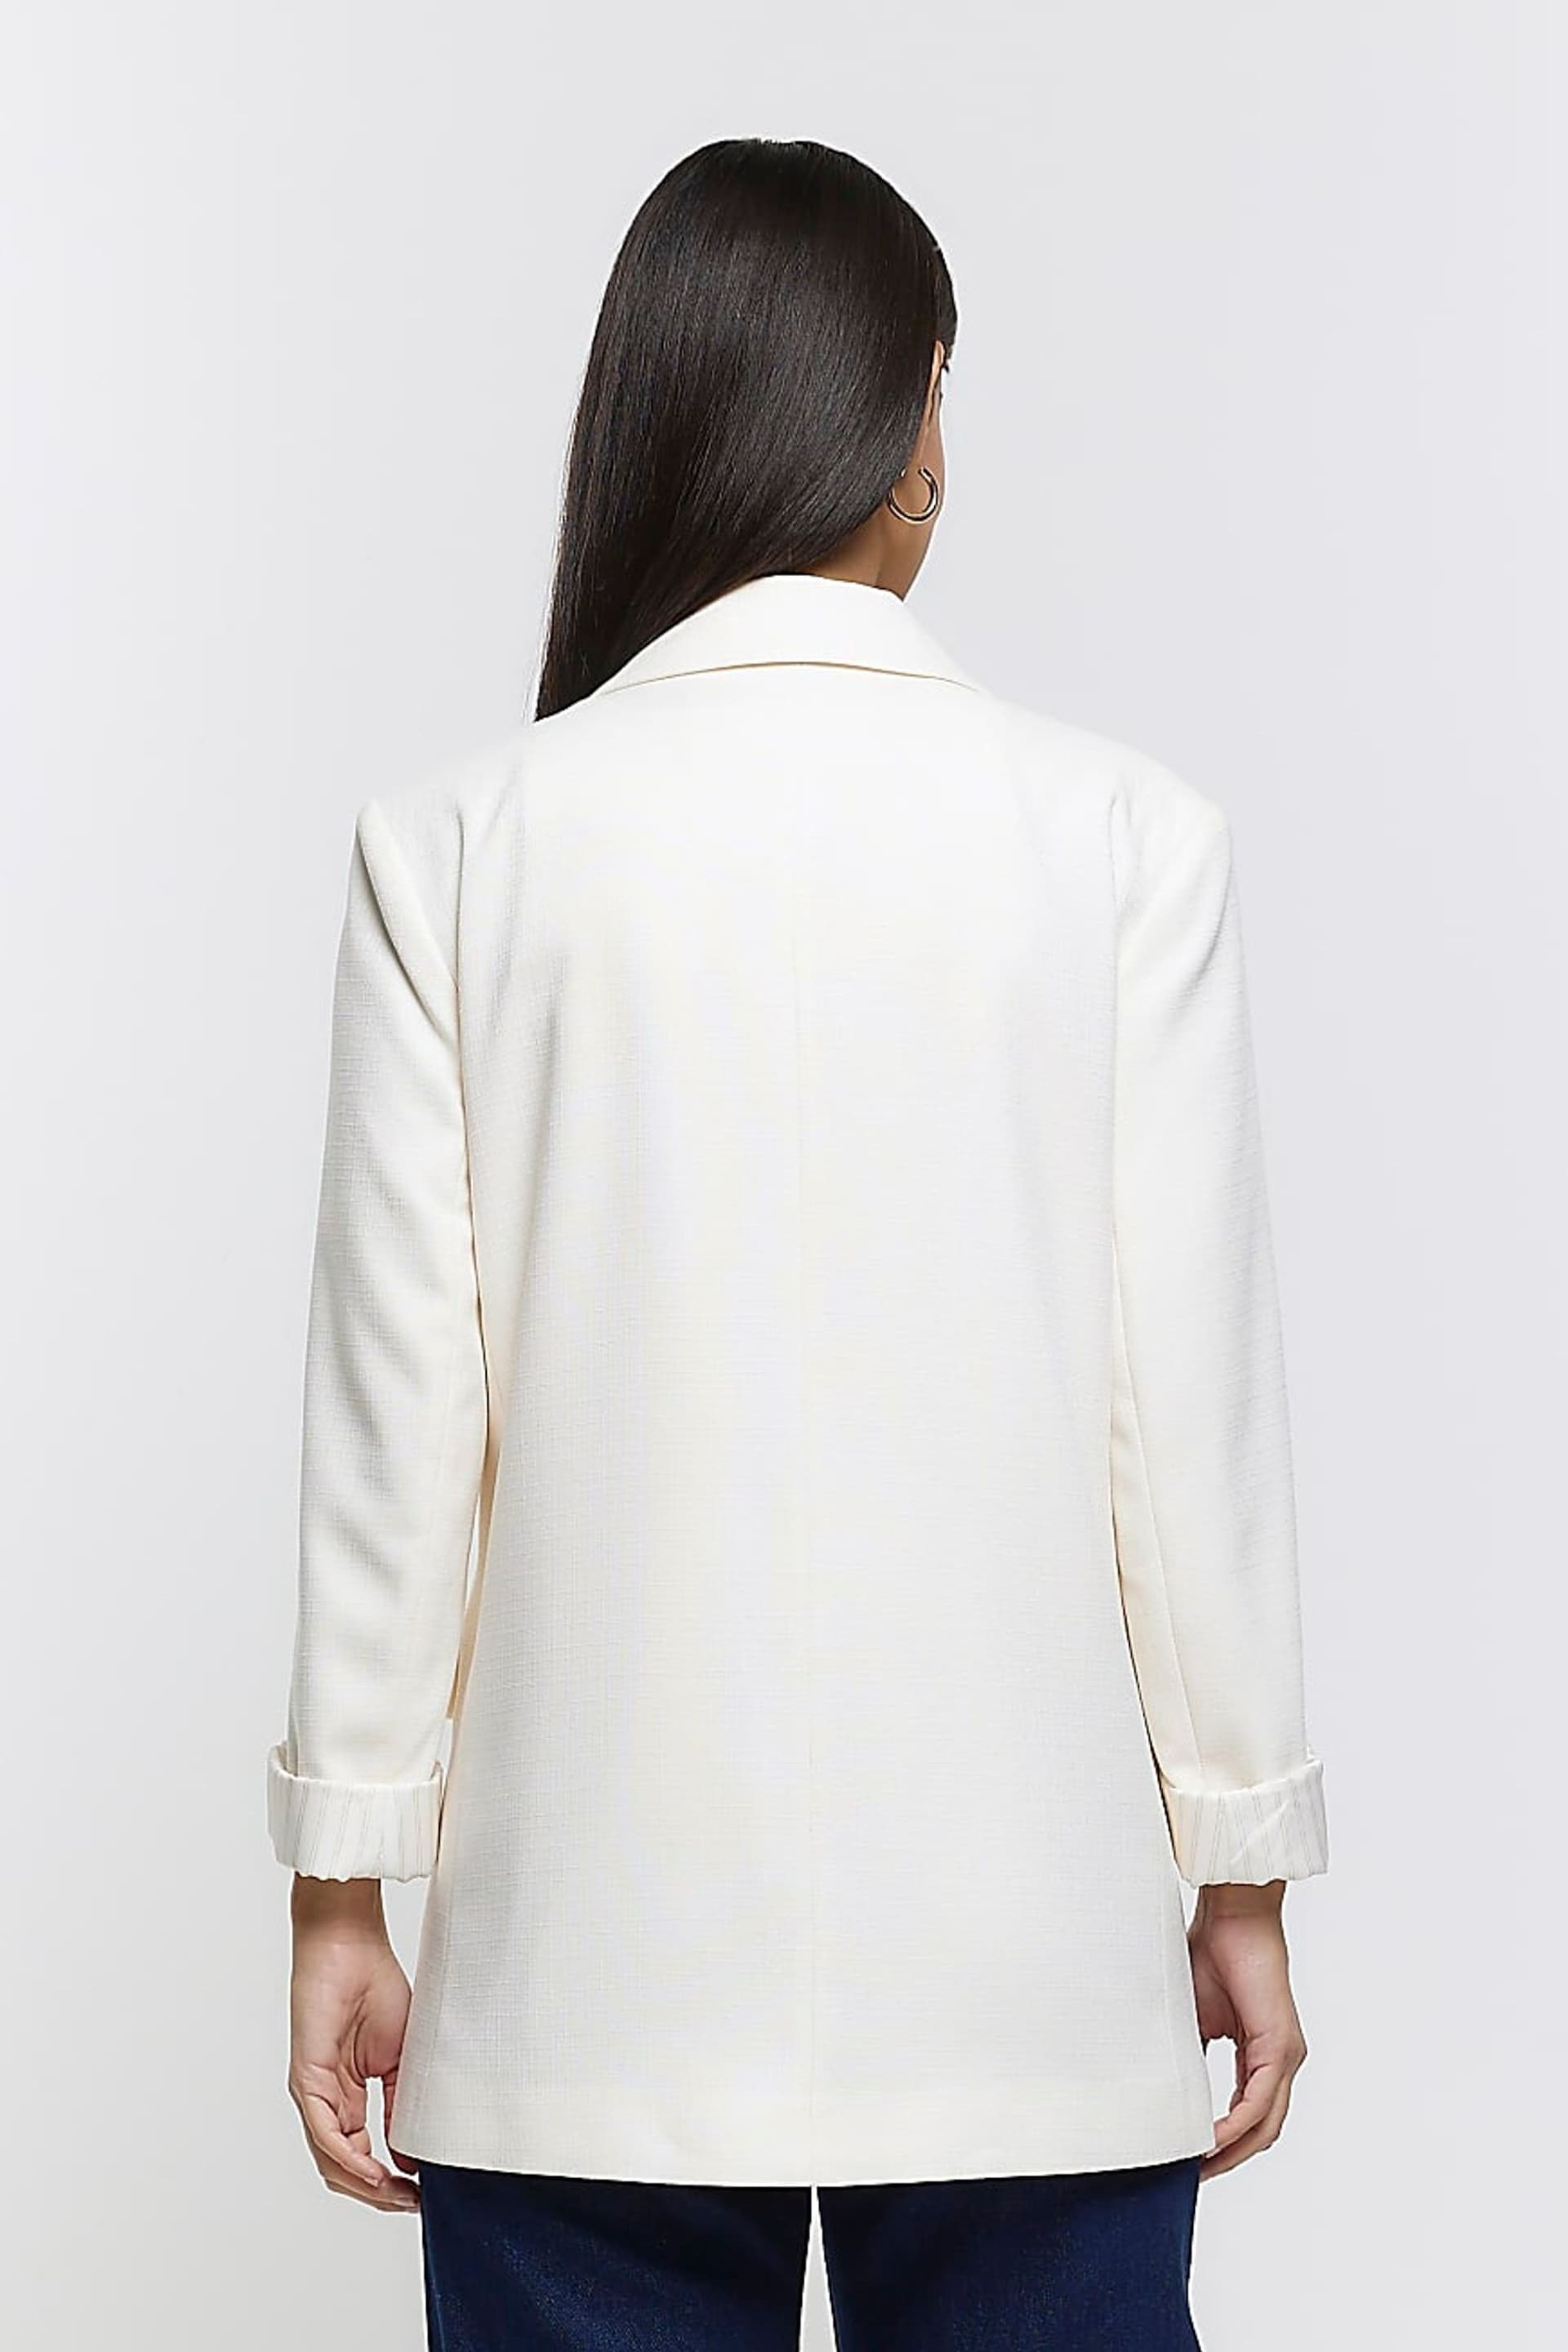 River Island Cream Rolled Sleeve Relaxed Blazer - Image 2 of 6